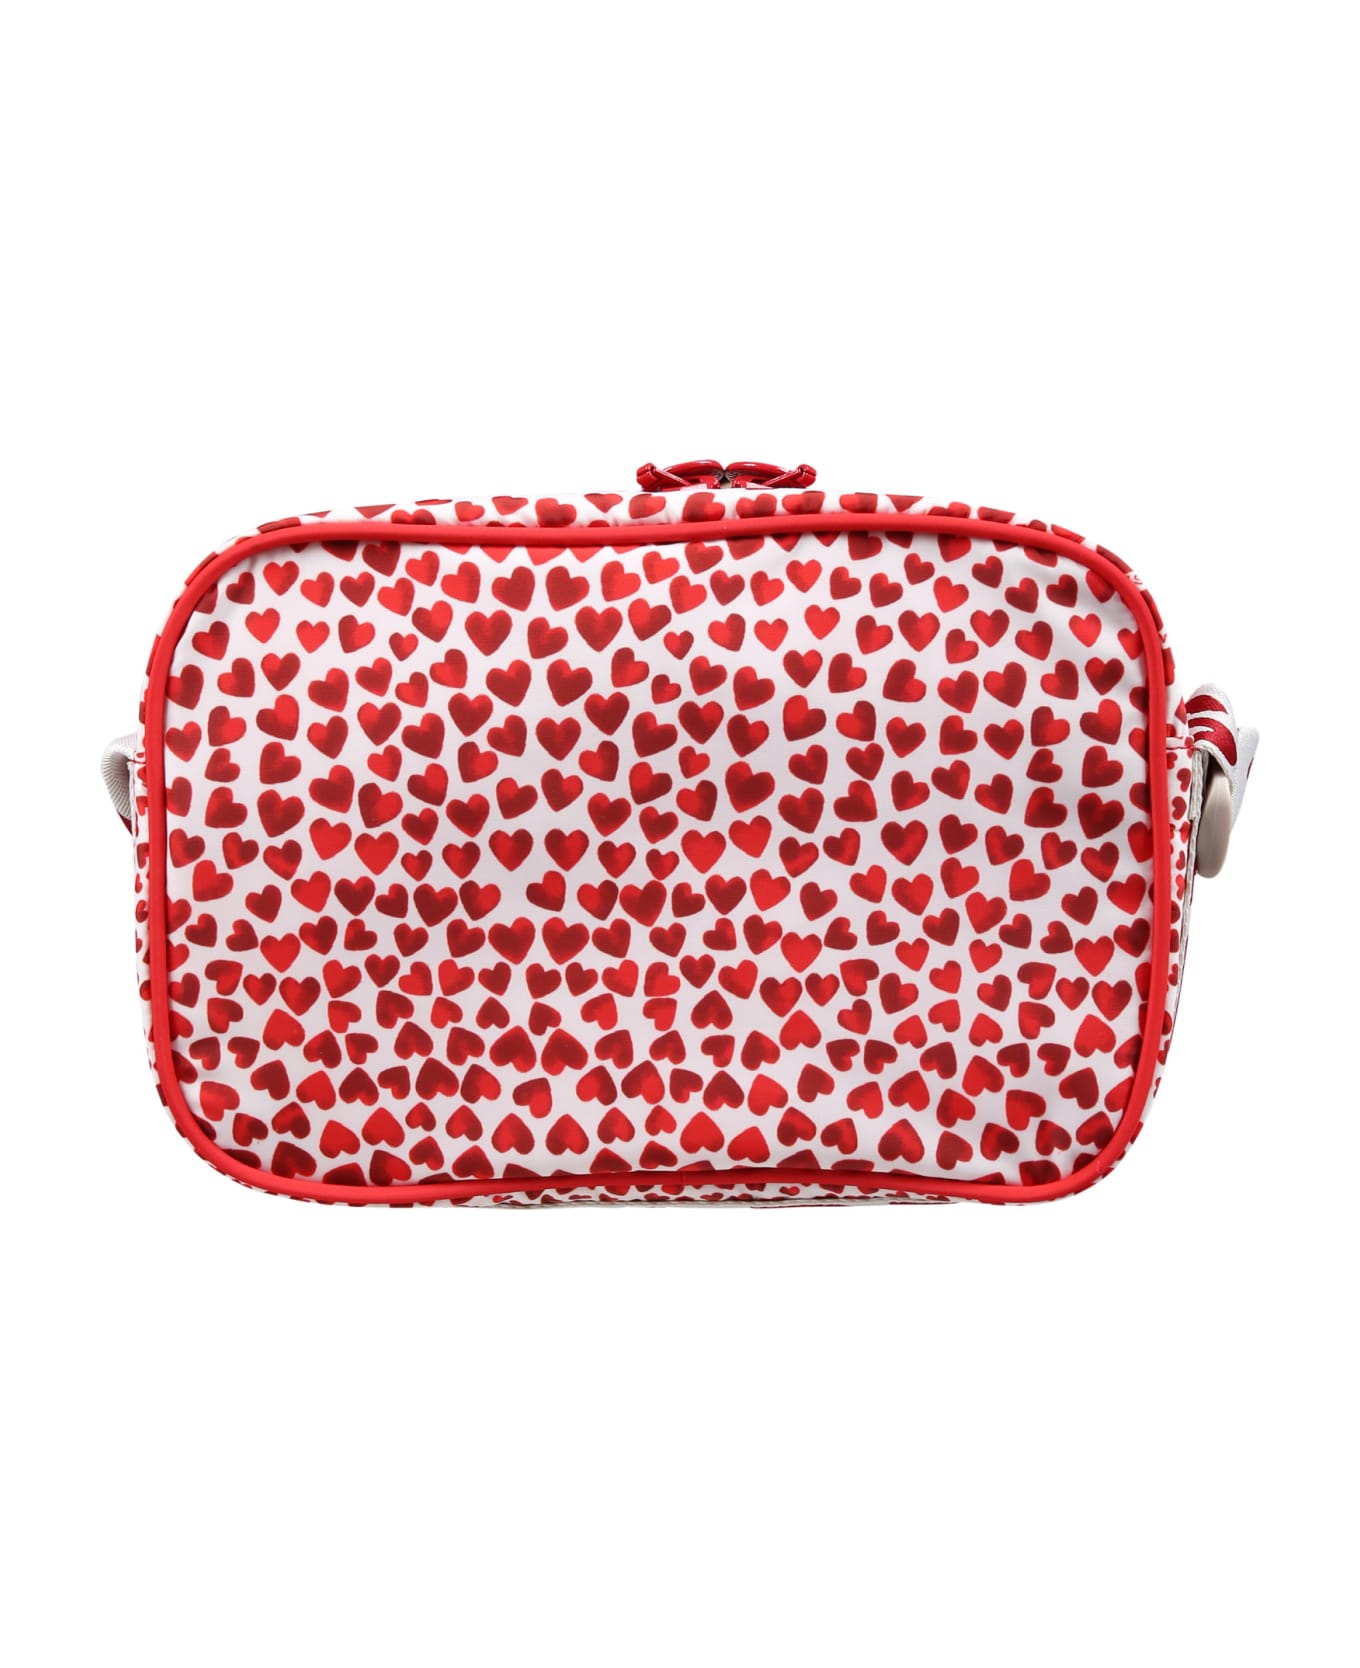 Stella McCartney Kids Casual Red Bag For Girl With Hearts - Red